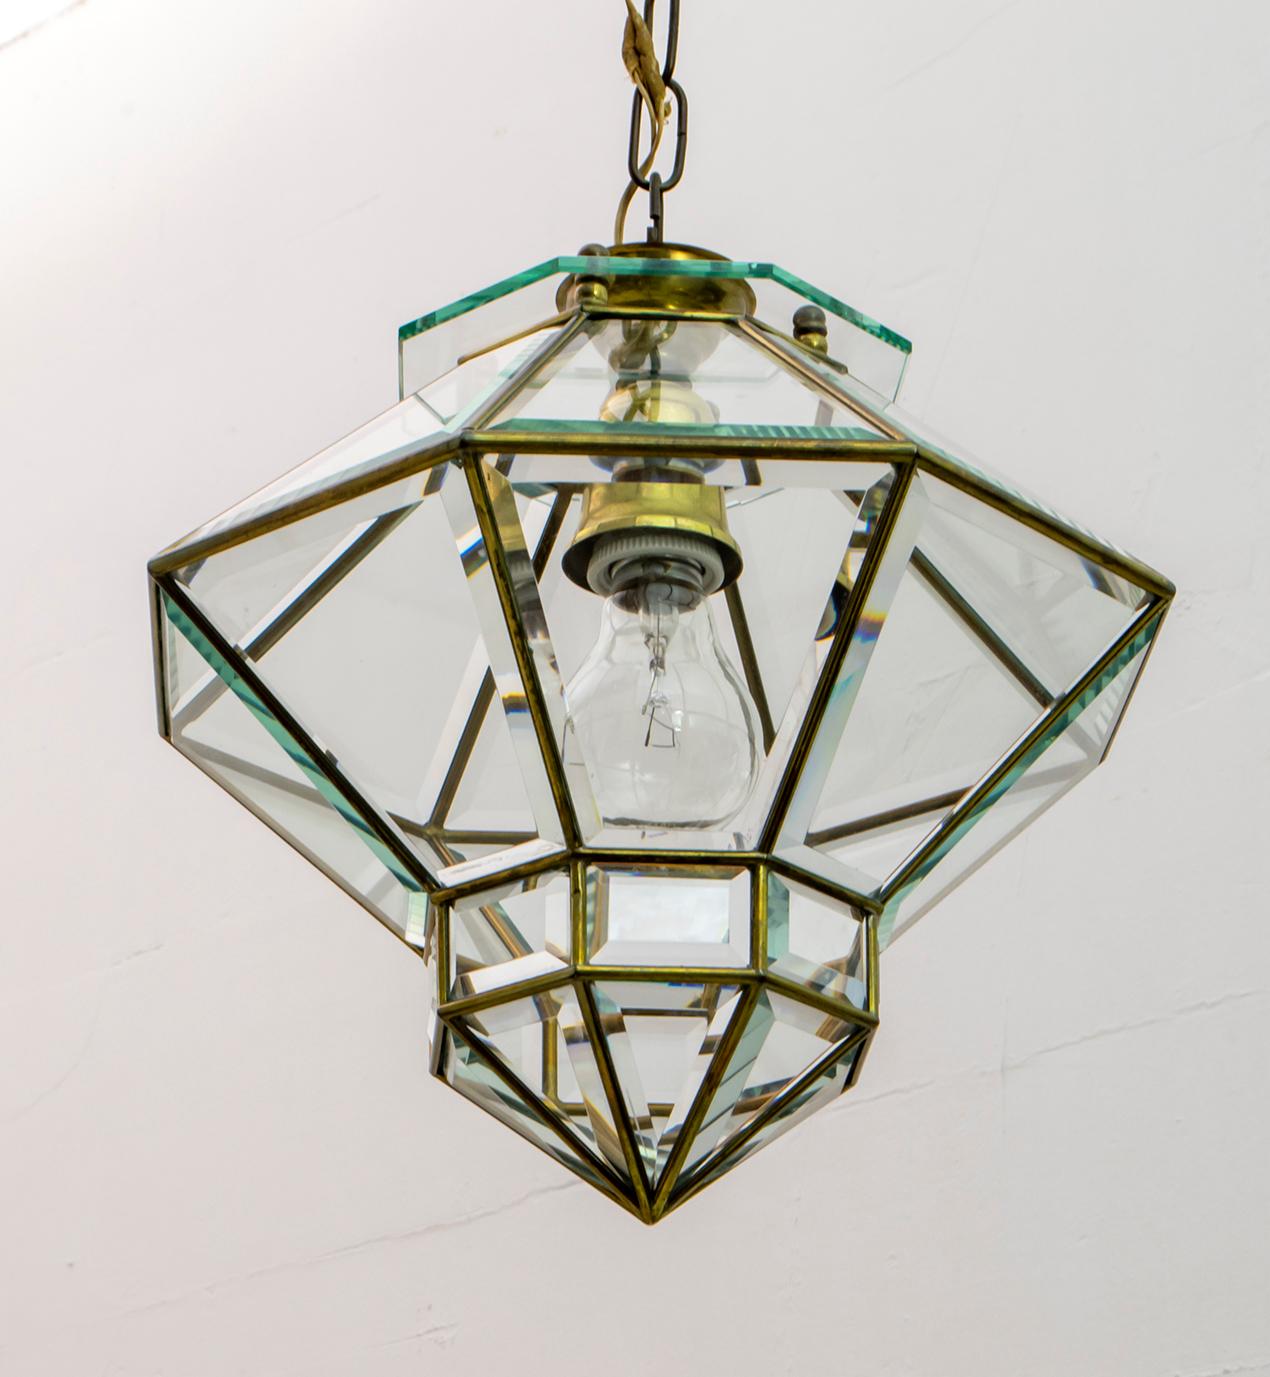 Secessionist Vienna (Sezession, Secessionsstil or Jugendstil) period and style pendant and beveled glass suspension fixture attributed to the Austro-Czech architect and designer Adolf Loos (1870-1933) of octagonal shape with 32 beveled glass panels